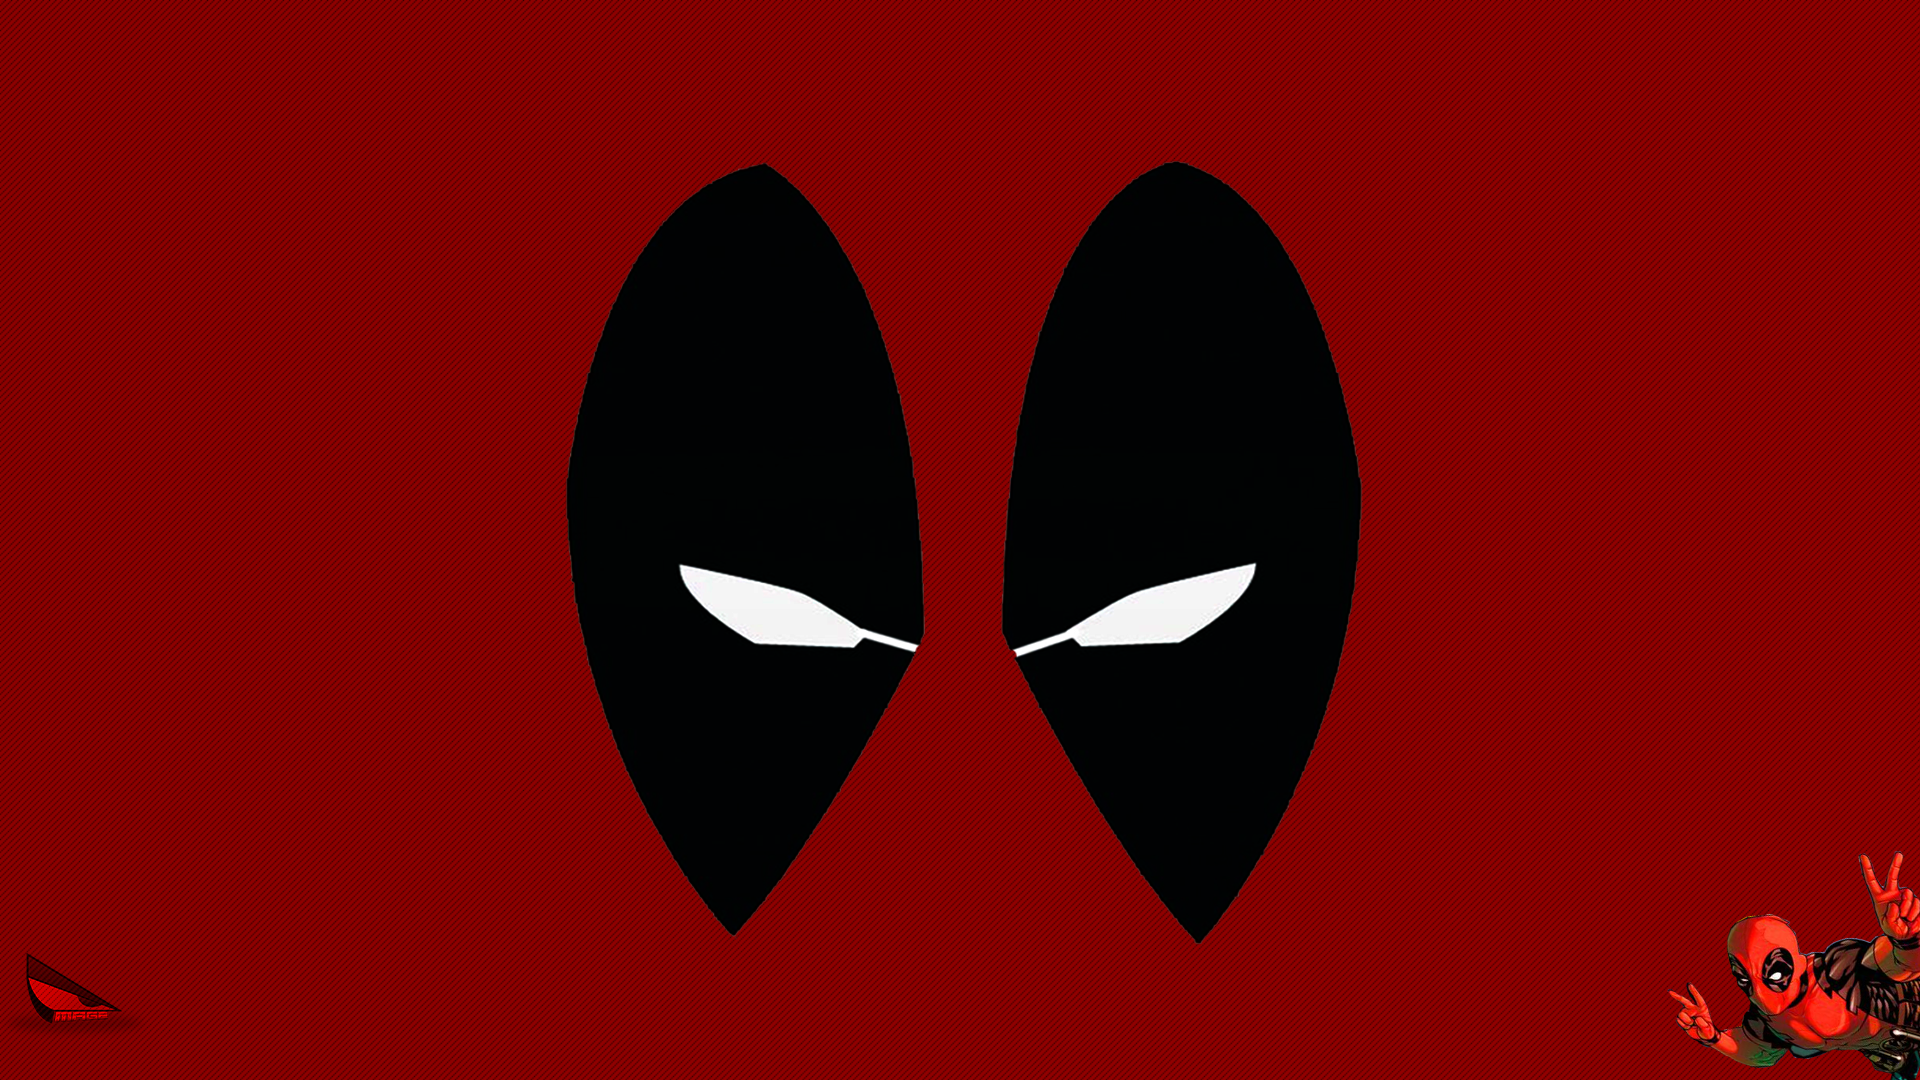 General 1920x1080 Deadpool Deadpool Corps Marvel Comics Wade Wilson red comics frontal view antiheroes red background simple background